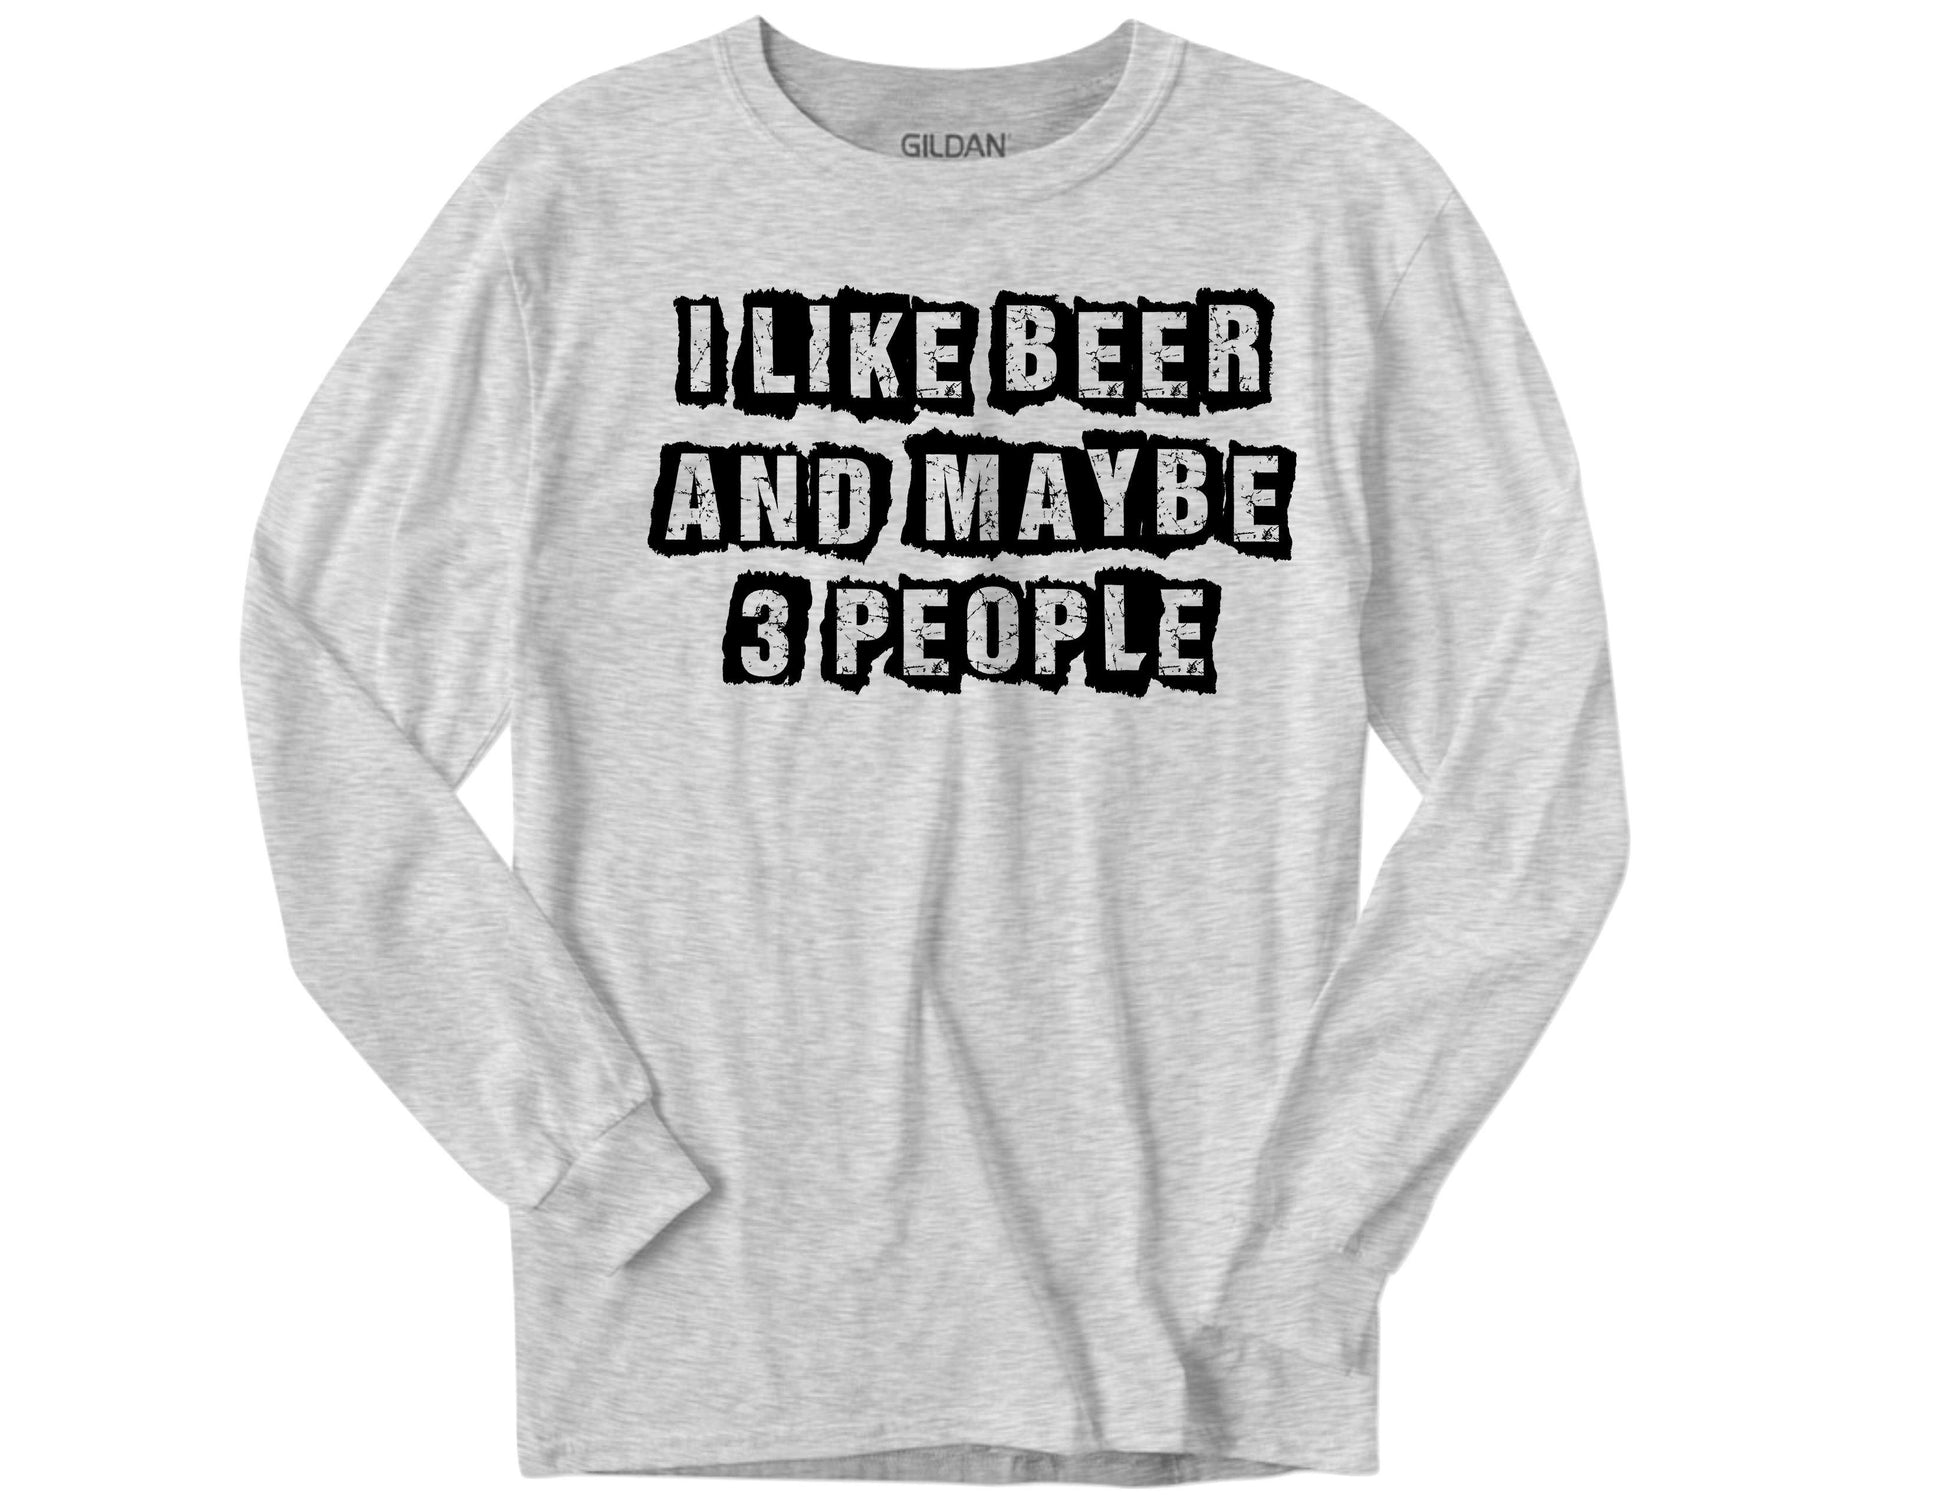 I Like Beer And Maybe 3 People - Men's/Unisex -  Rustic Cuts